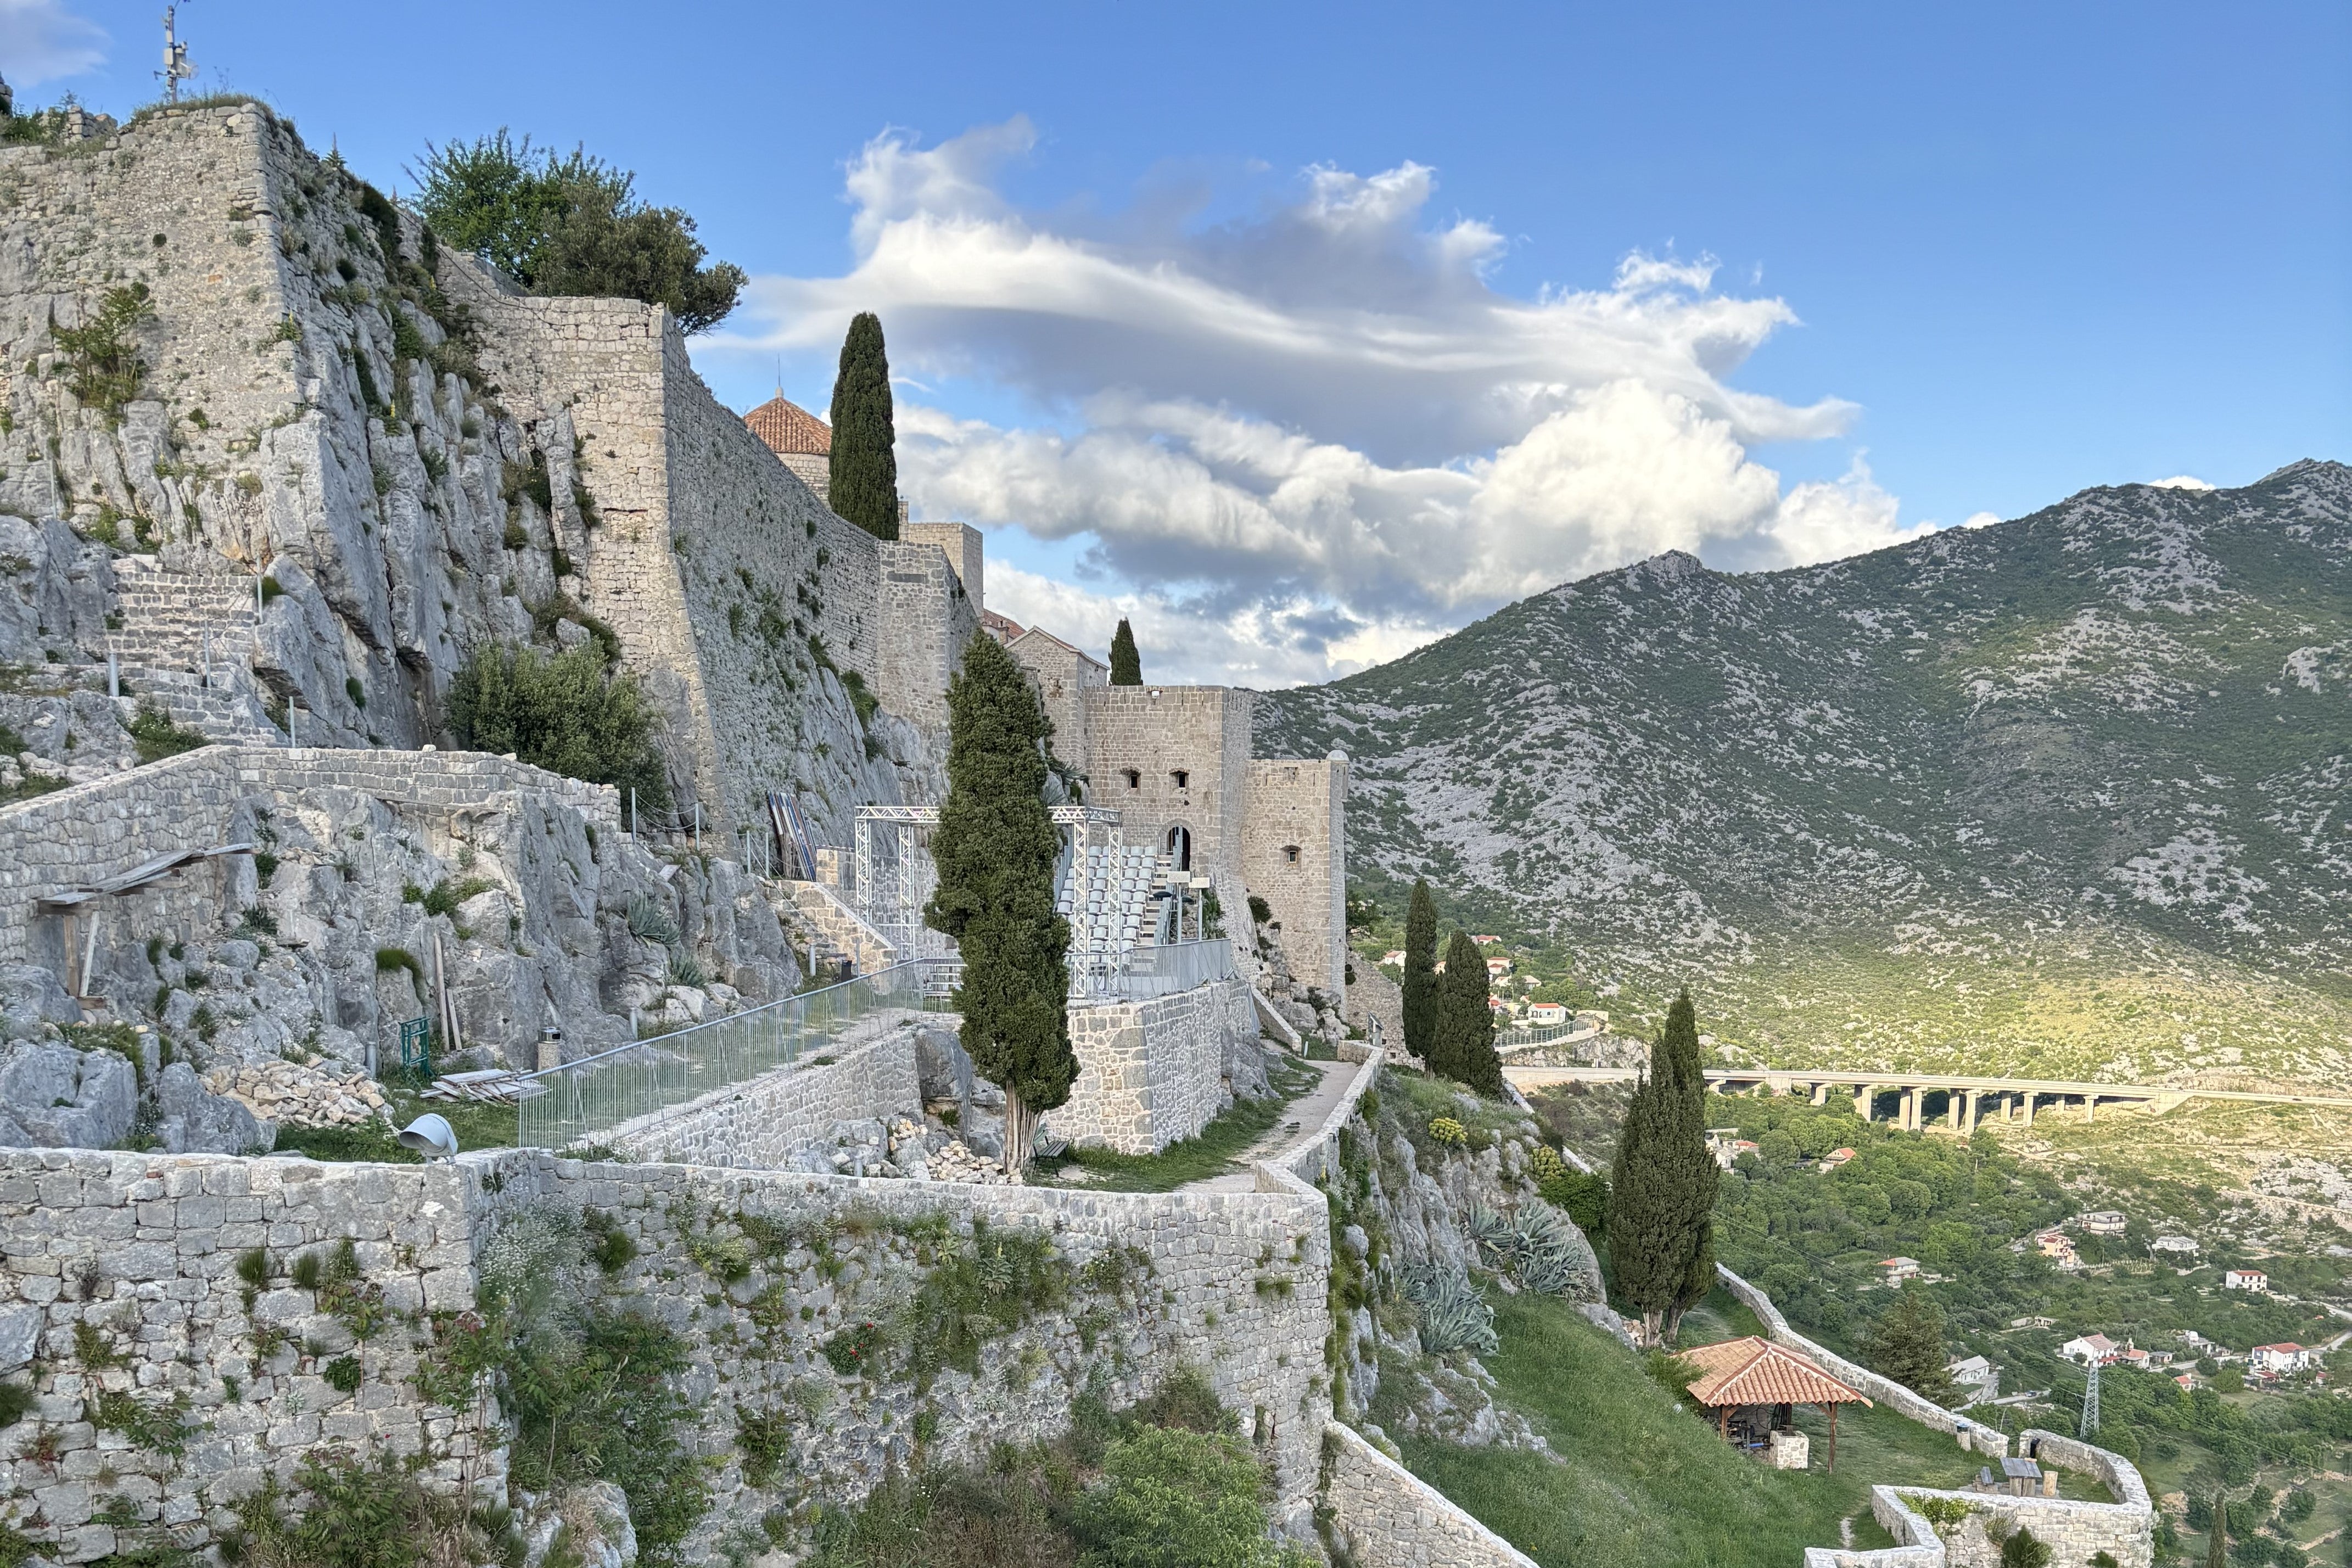 You may recognise it from Game of Thrones, but Klis Fortress has stood in place overlooking the village of Klis since the days of the ancient Illyrians